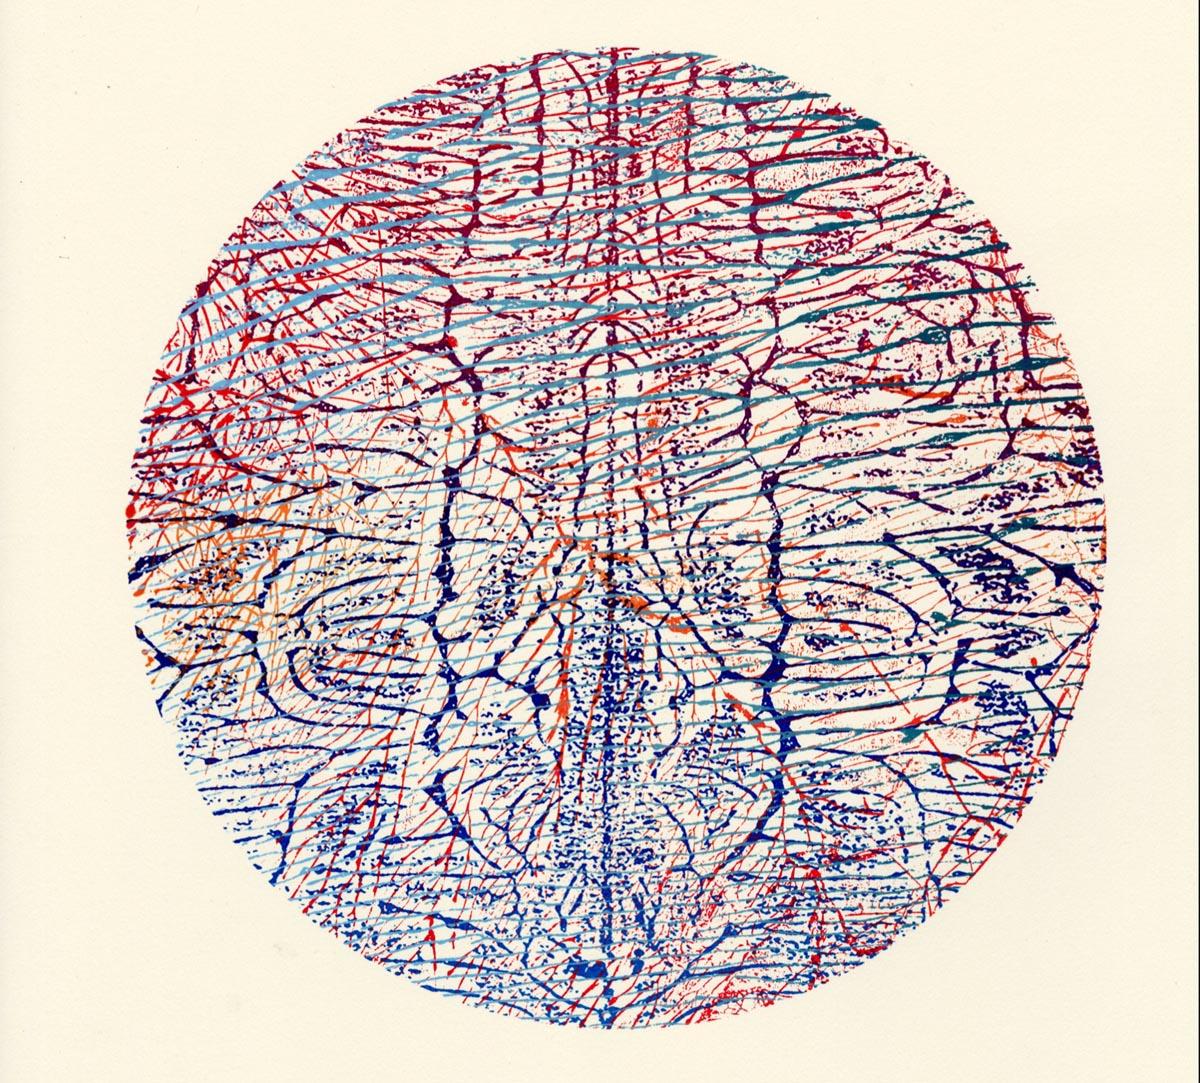 printed paint abstraction looks like cross section of brain